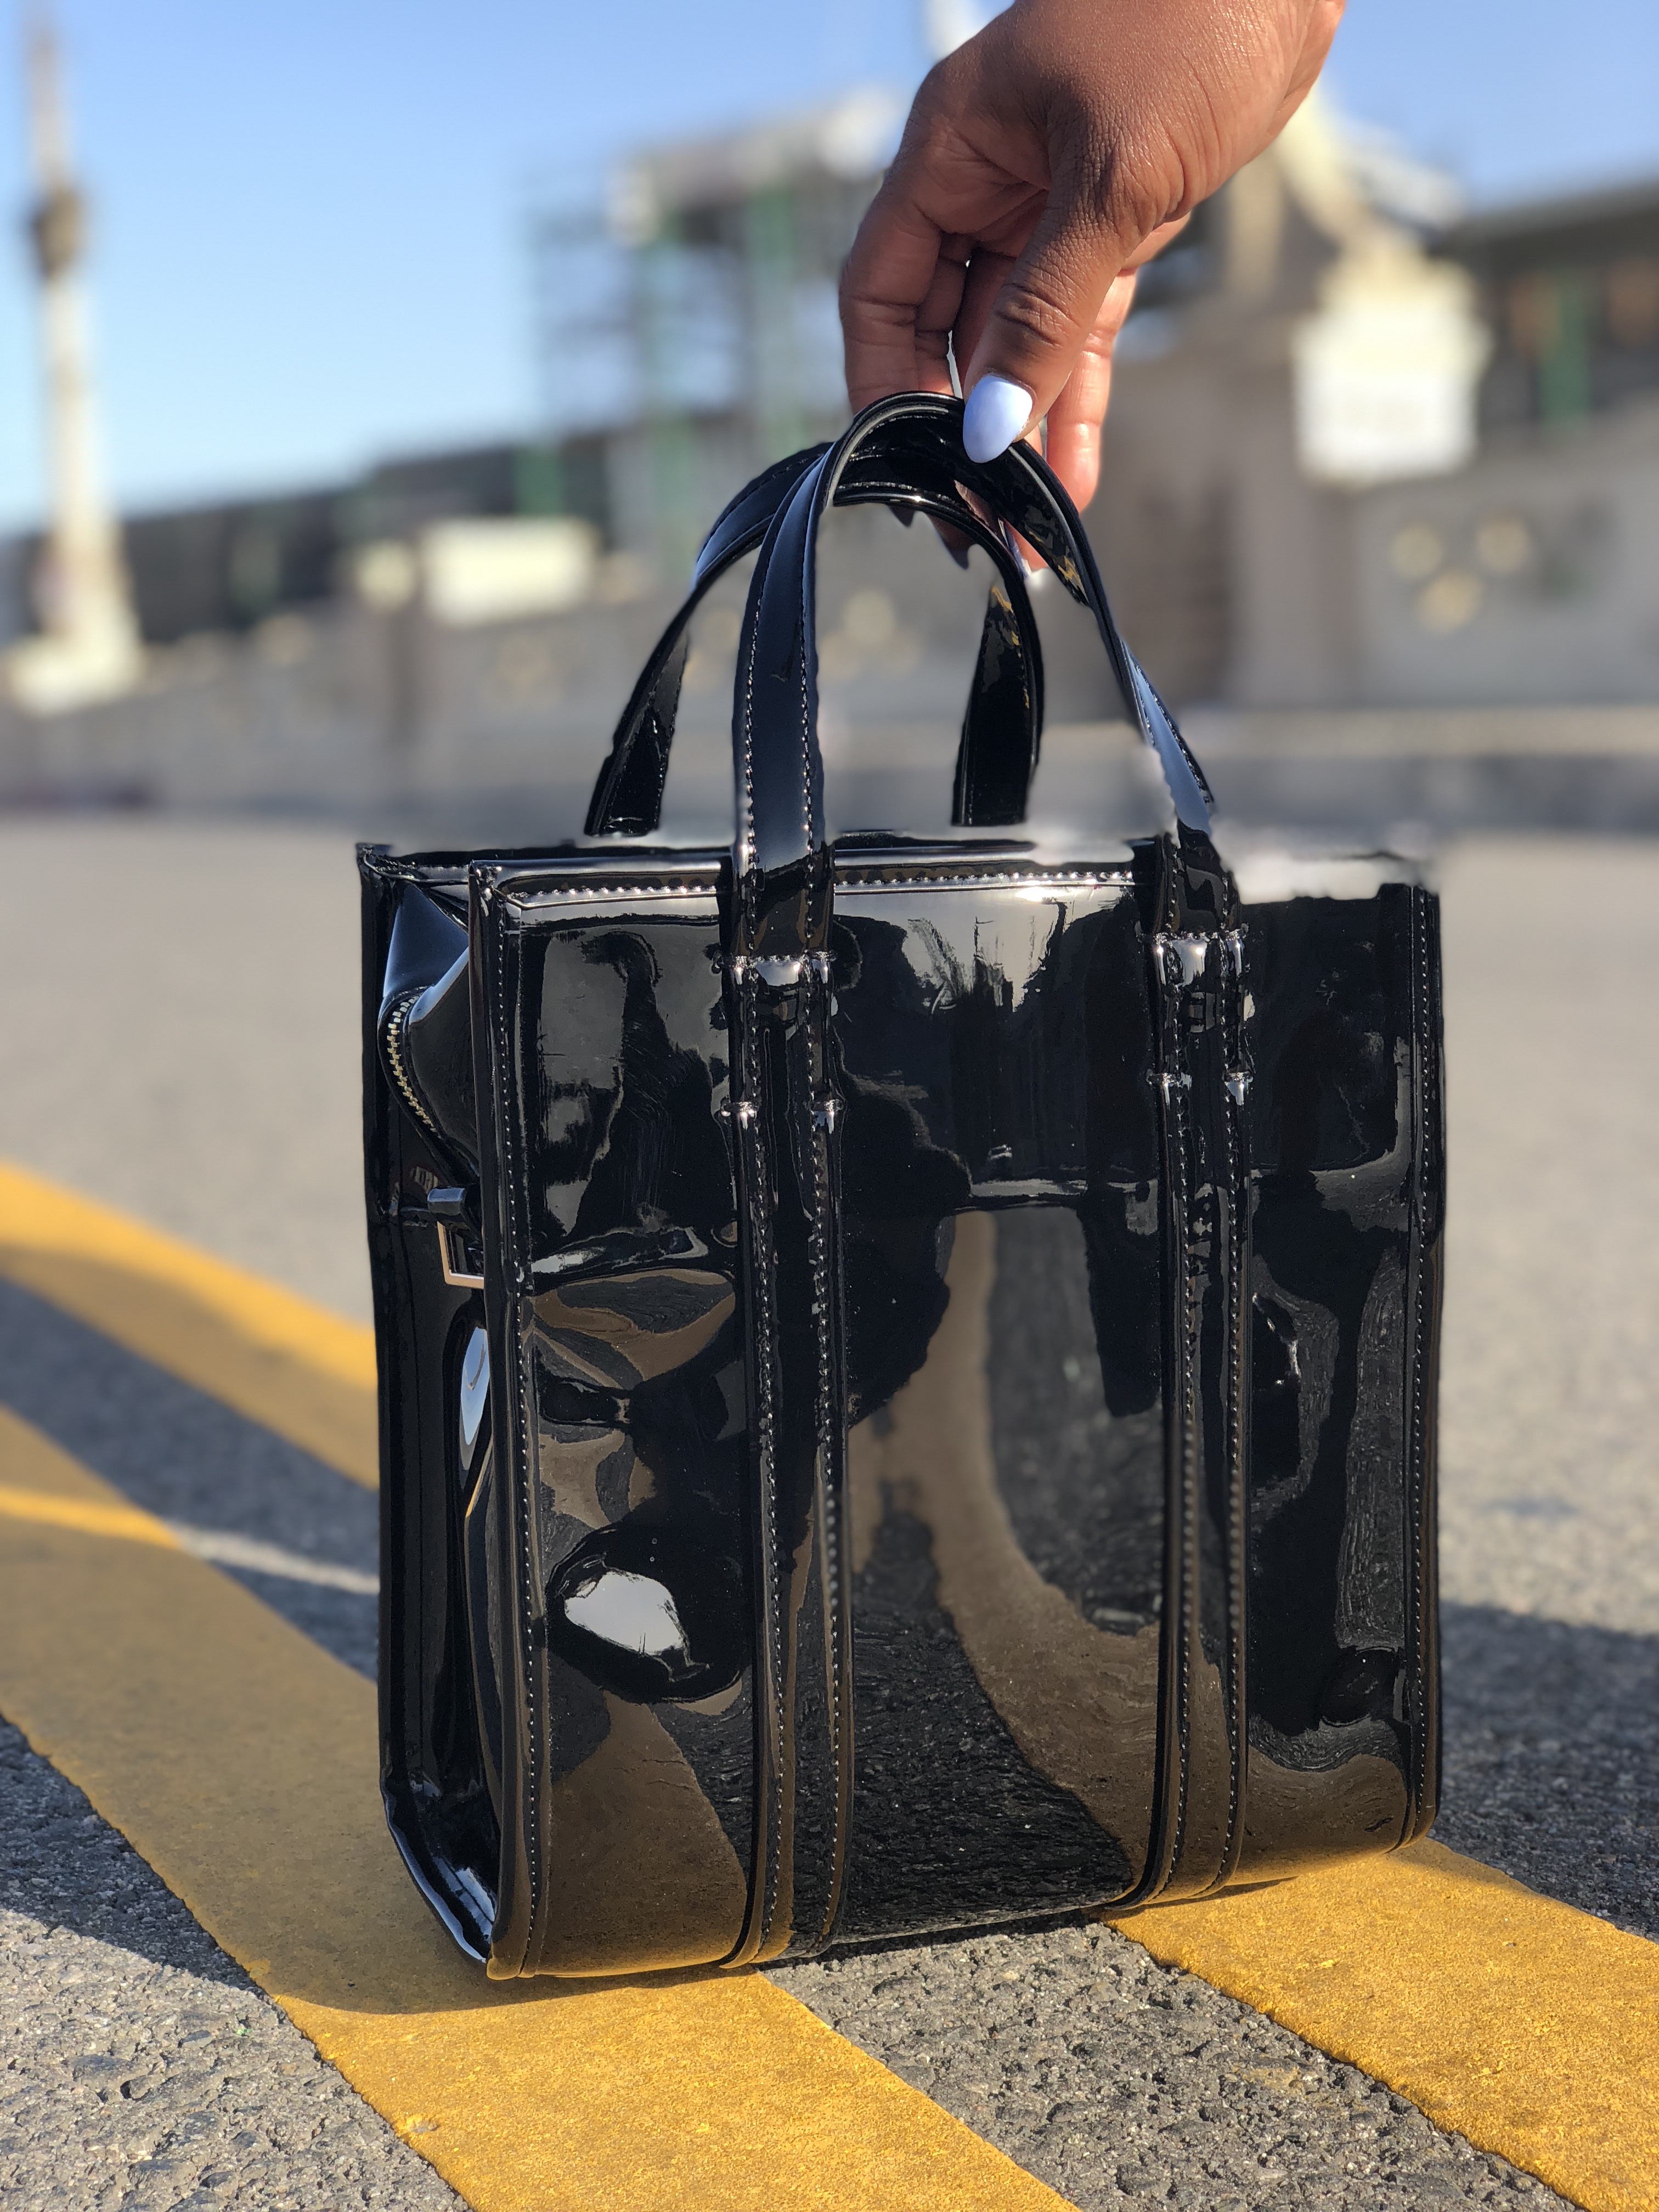 Patent Leather Bag